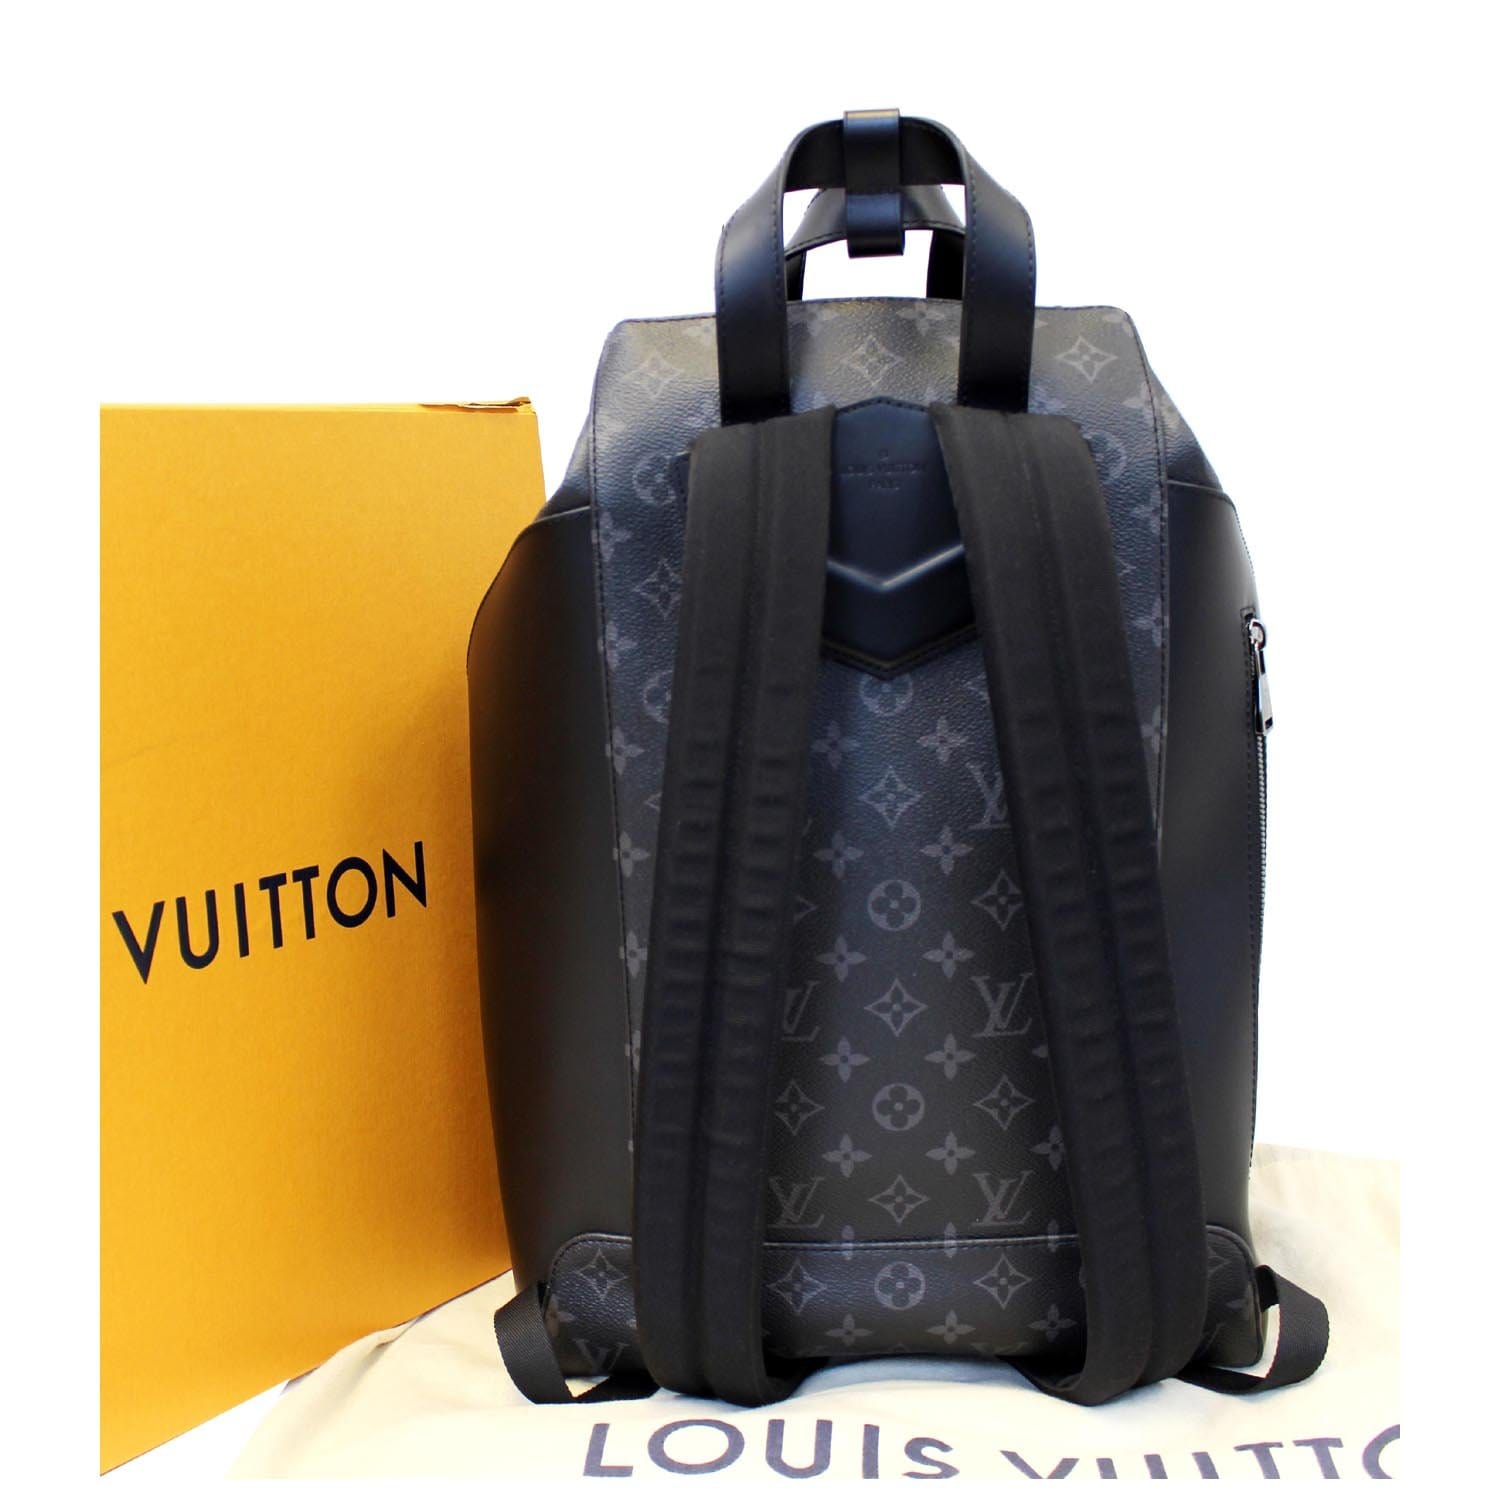 Louis Vuitton Discovery Backpack Review